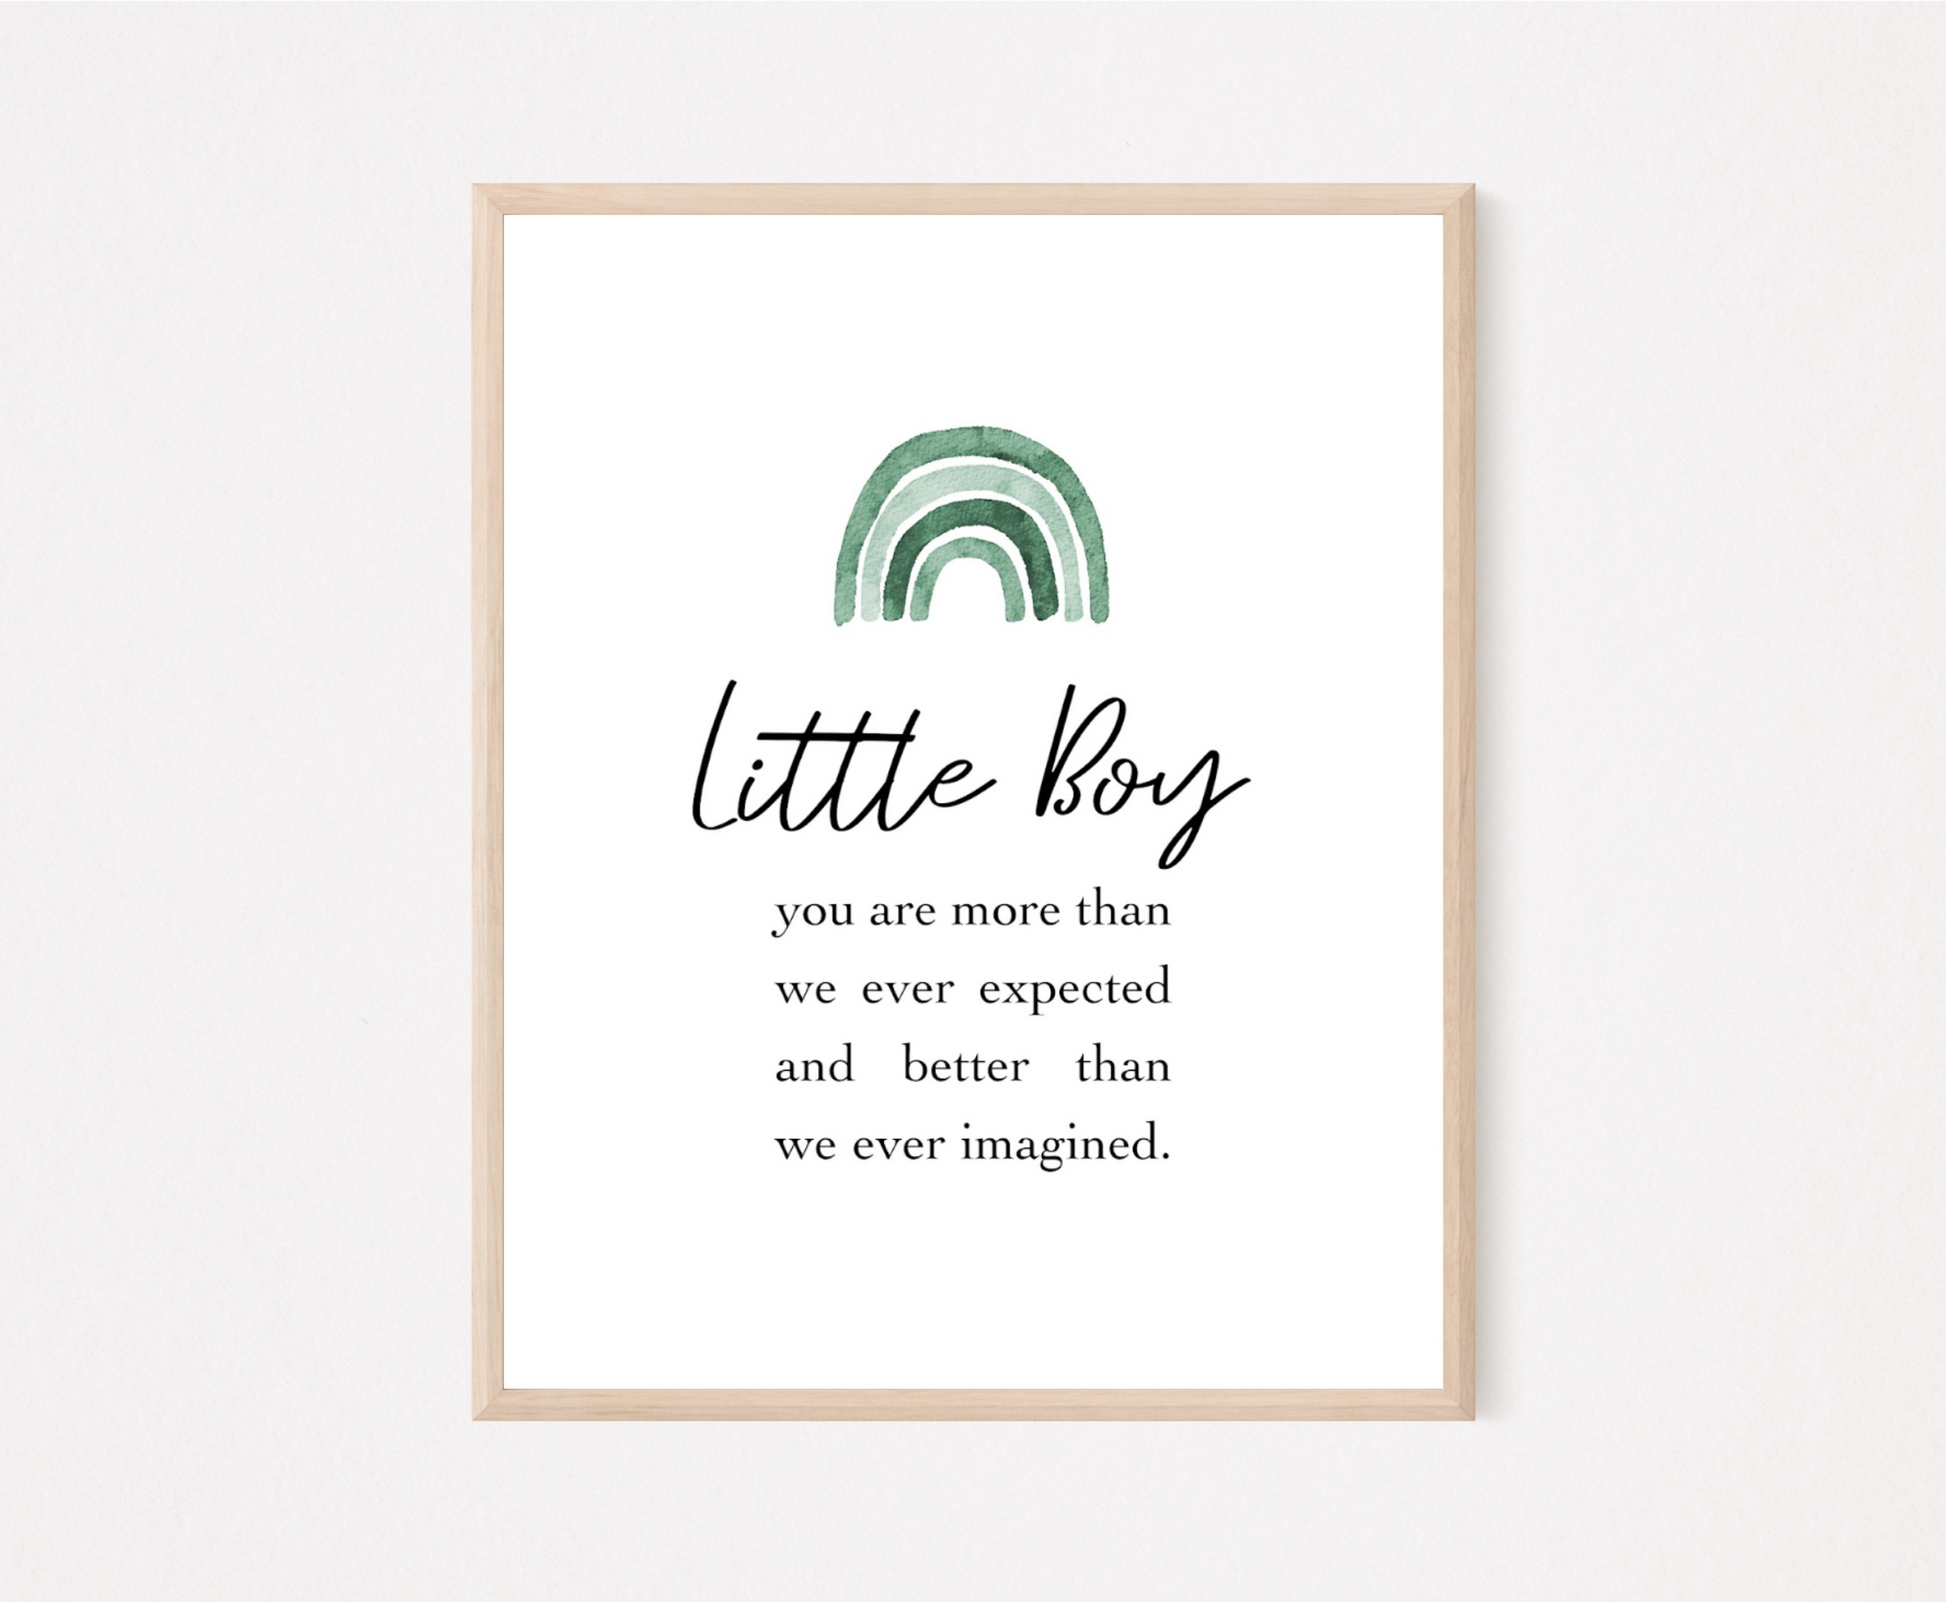 A frame showing a graphic for a little boy’s room displaying a rainbow design in different shades of green  and includes a piece of writing that says: Little boy, you are more than we ever expected and better than we ever imagined.